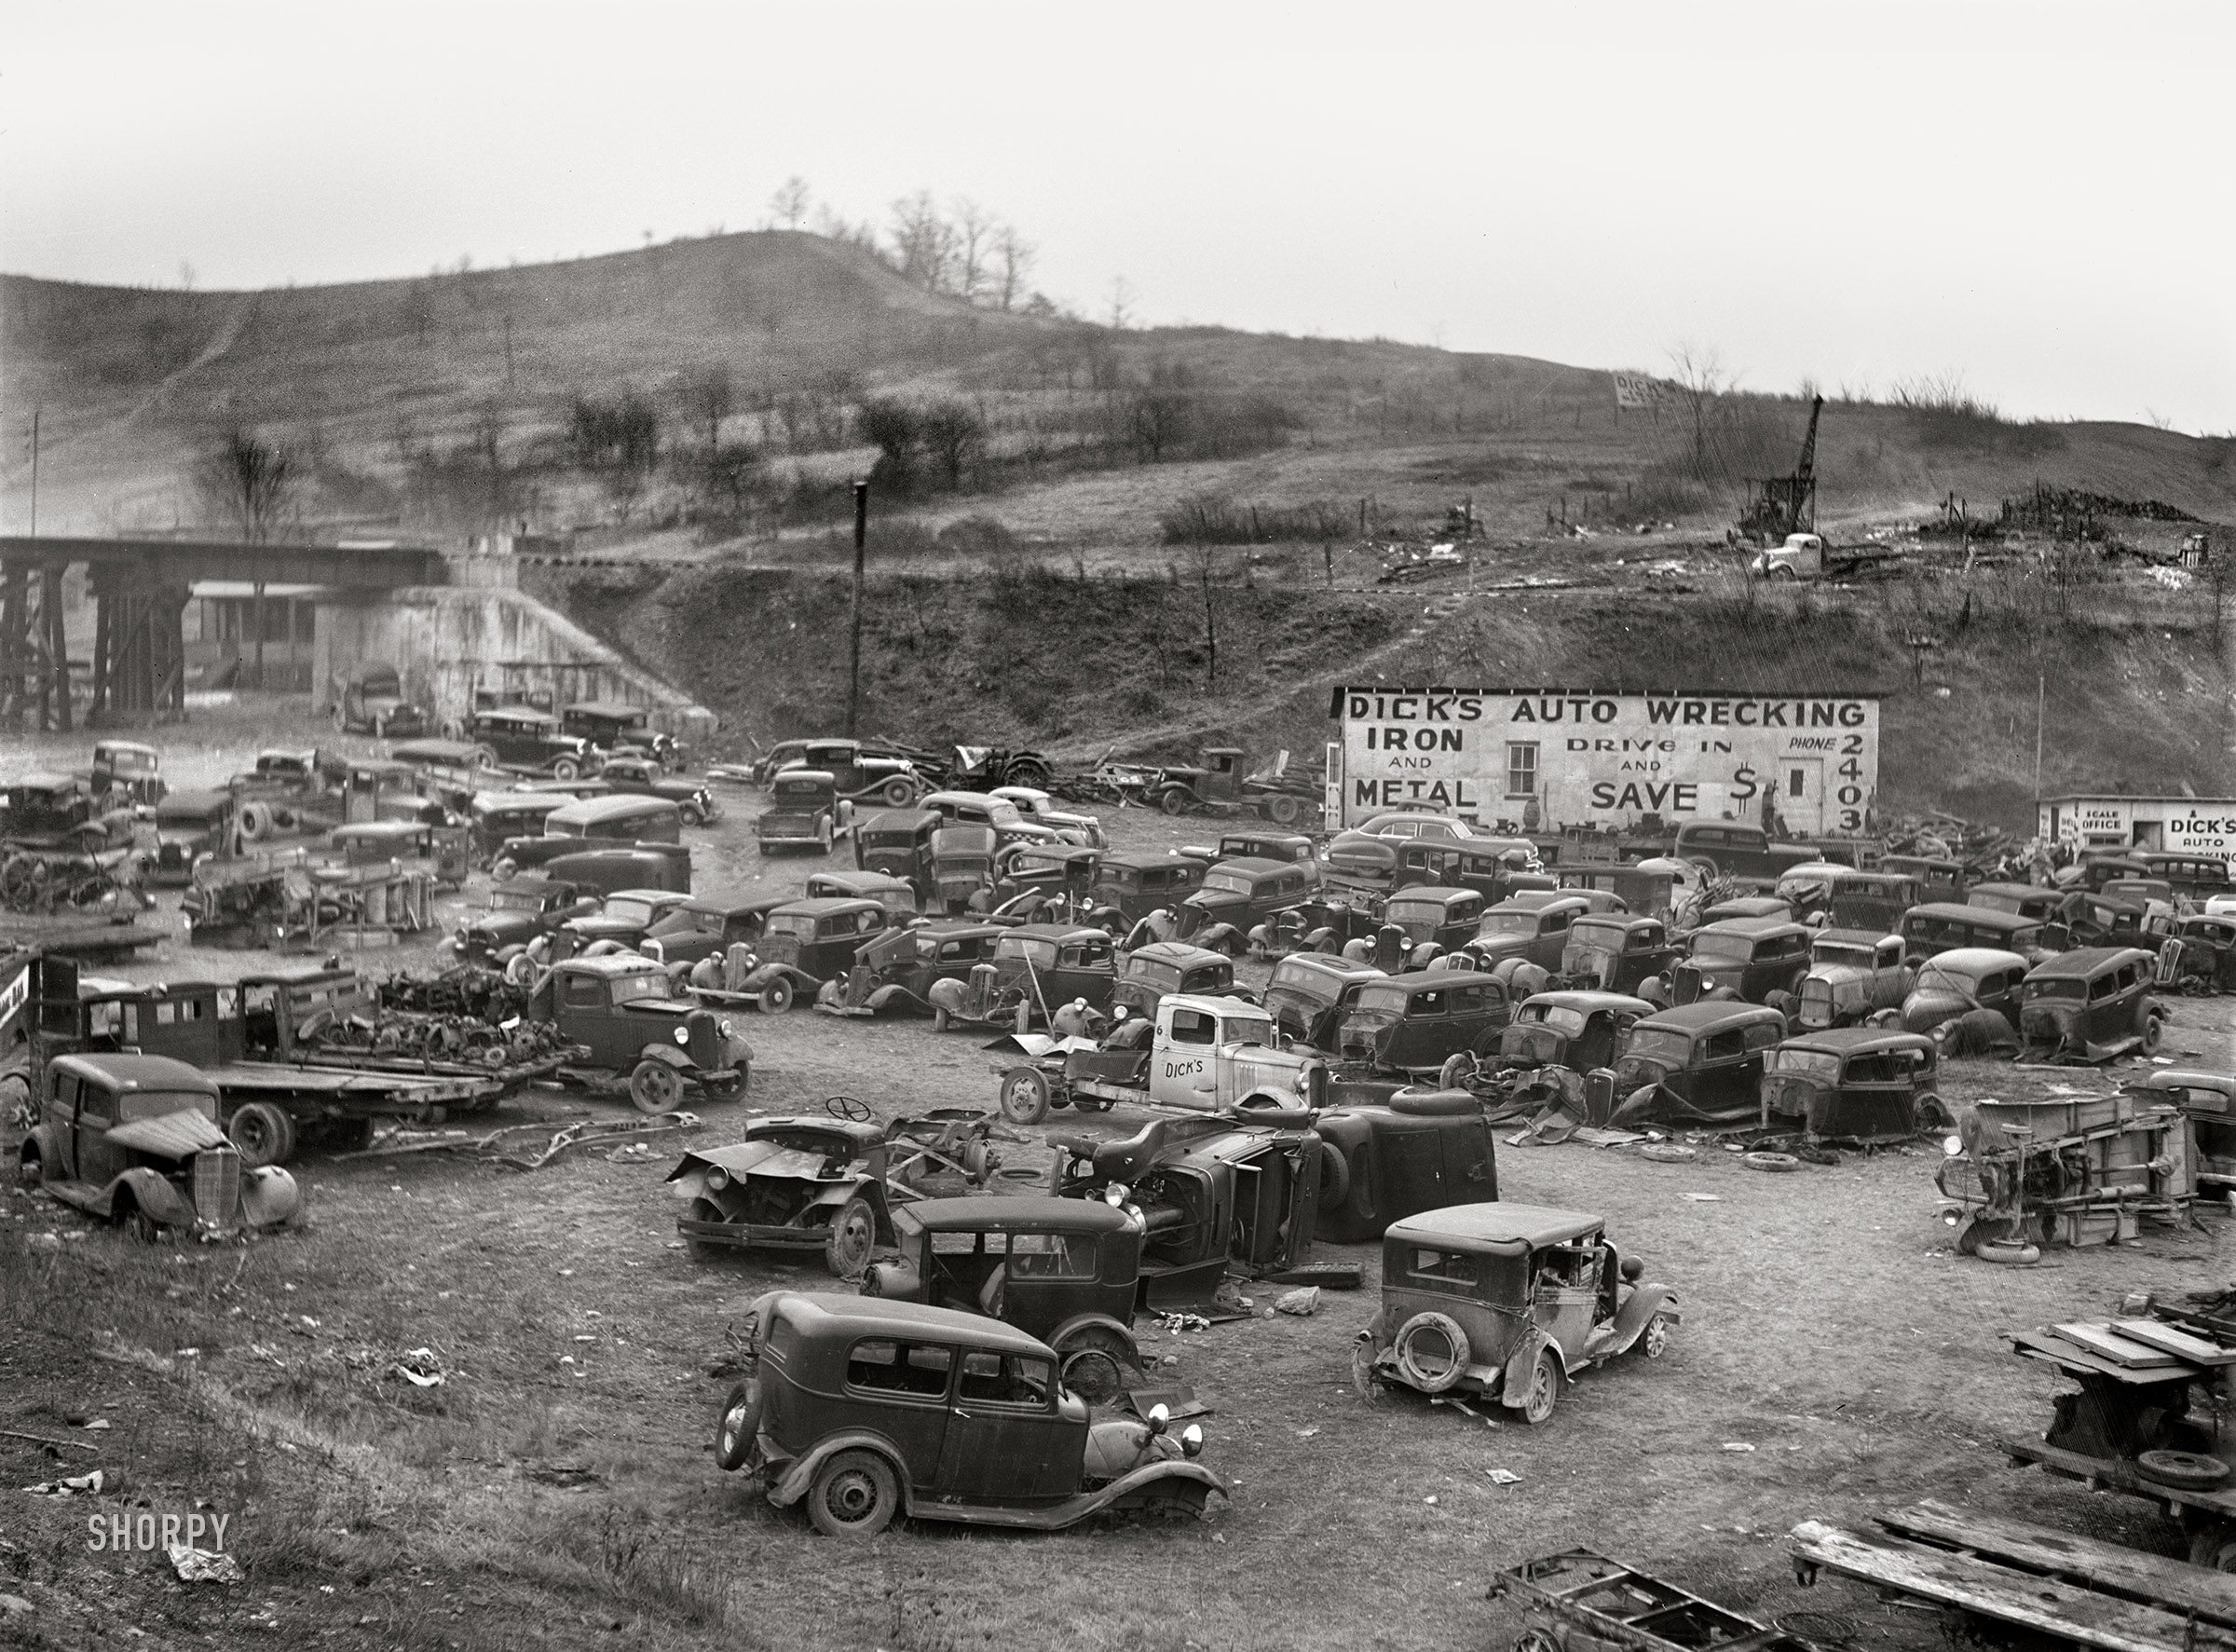 January 1942. "Wrecking yard in Clarksburg, West Virginia." Medium format acetate negative by John Vachon for the Office of War Information. View full size.